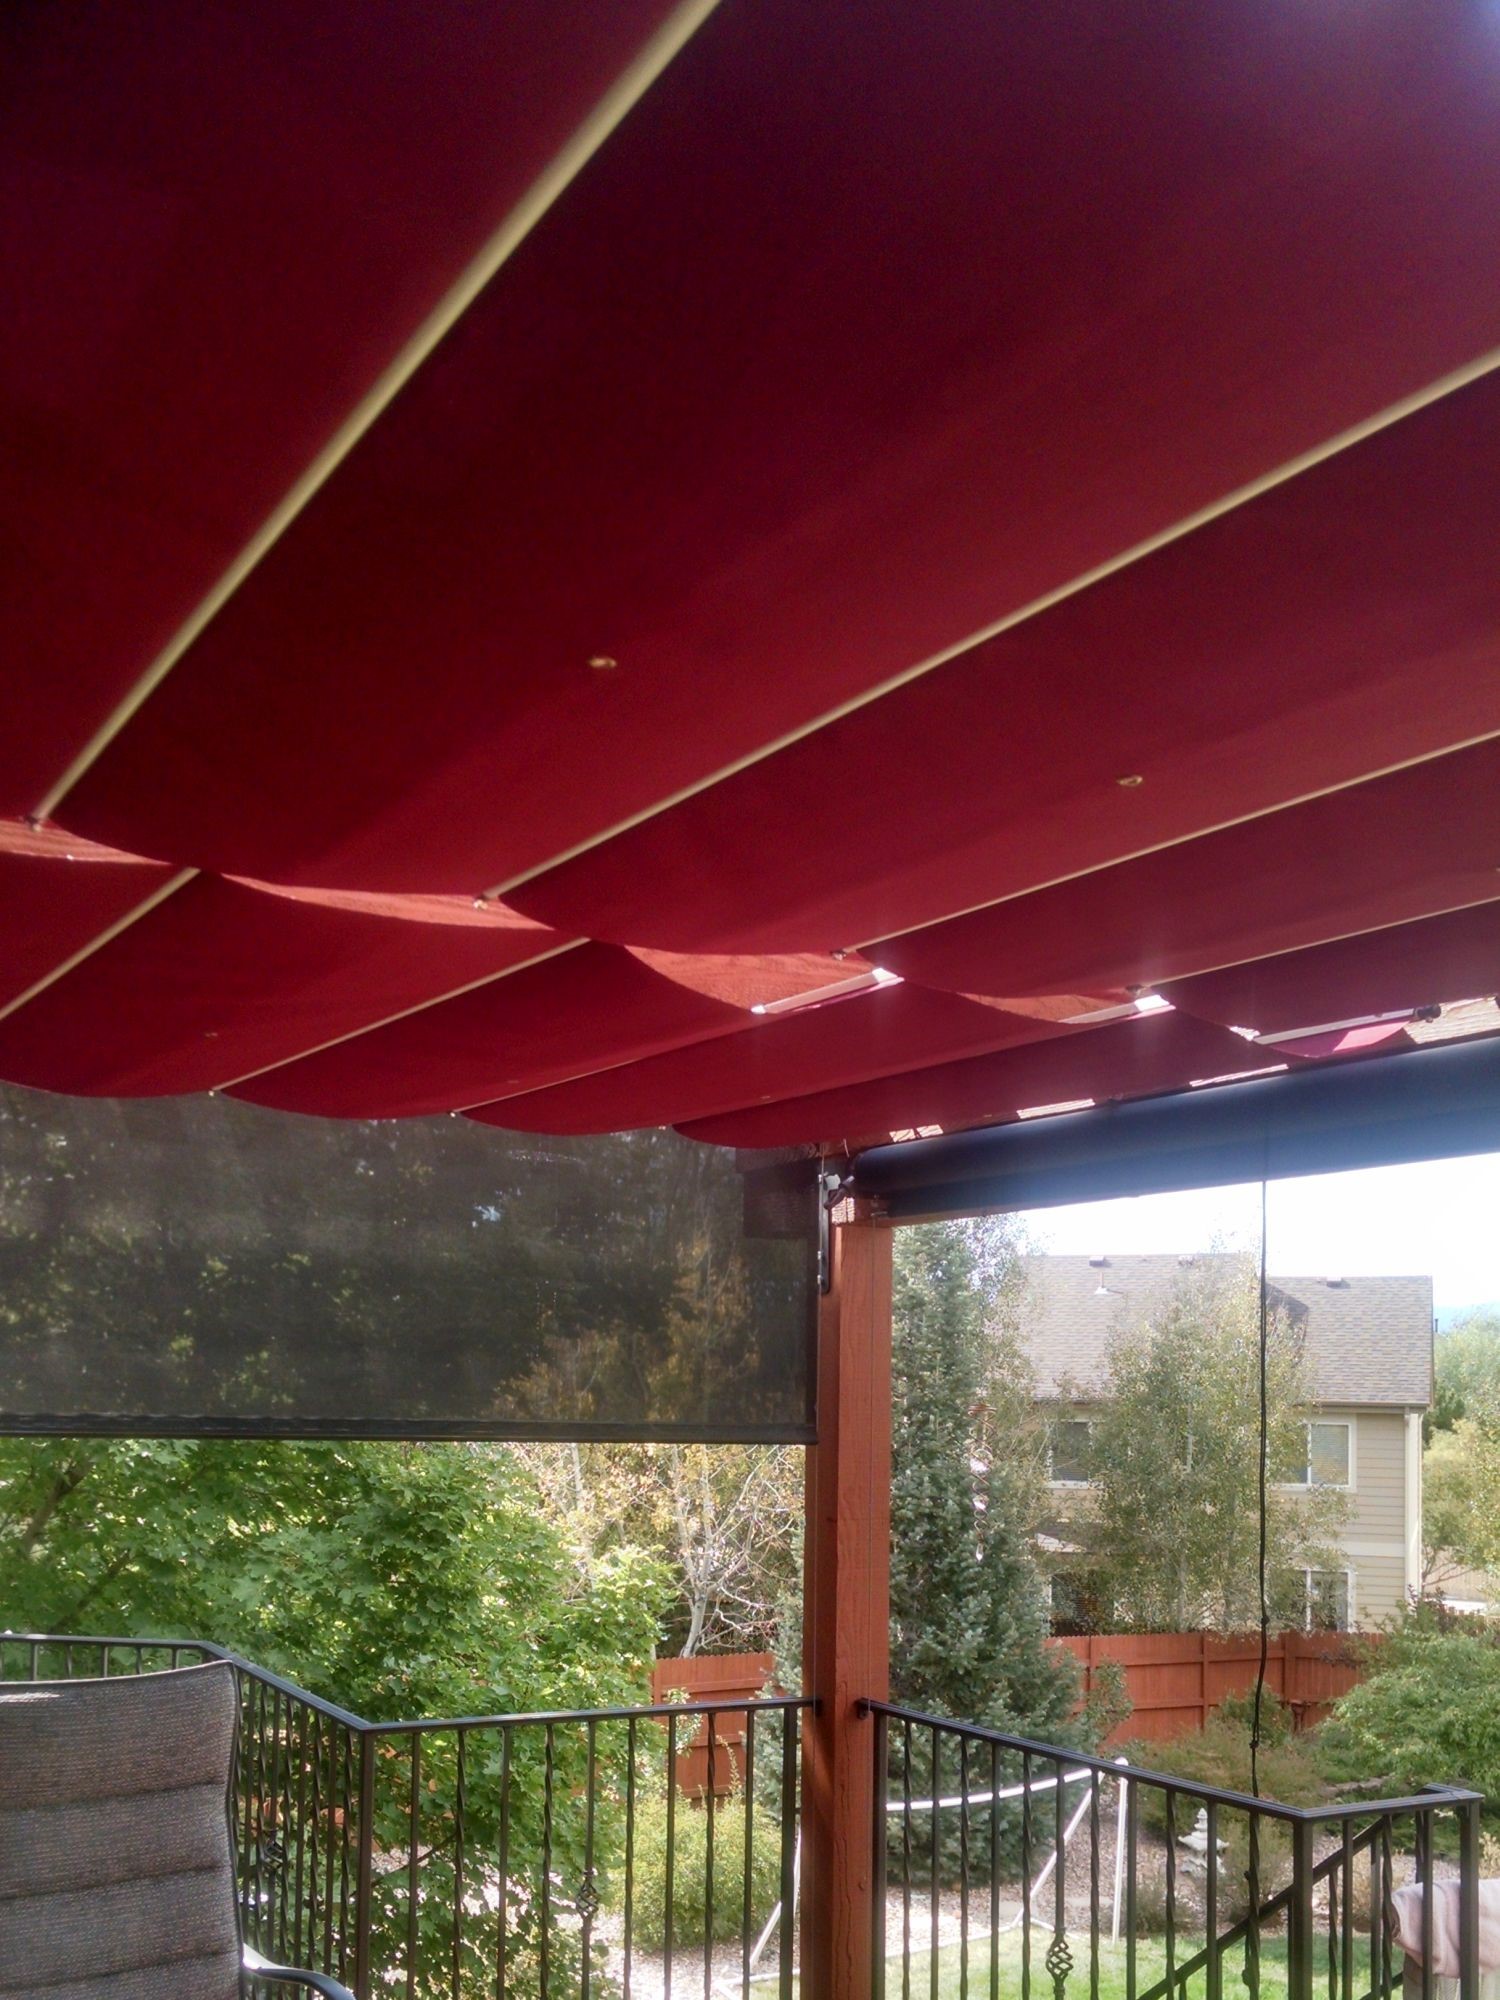 Pergola with sliding shades along the top to provide full shade when desired.